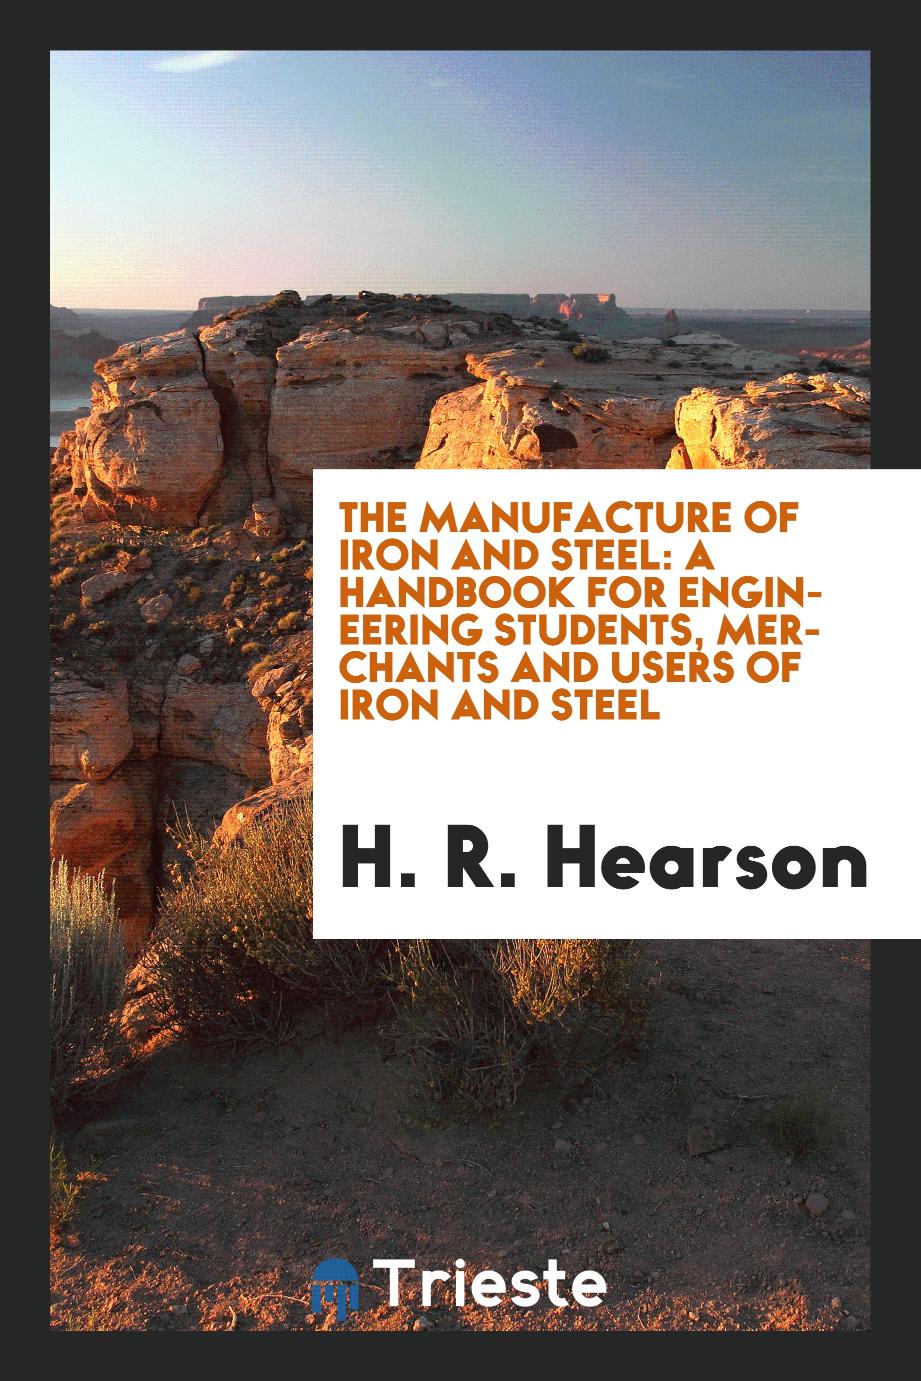 The Manufacture of Iron and Steel: A Handbook for Engineering Students, Merchants and Users of Iron and Steel